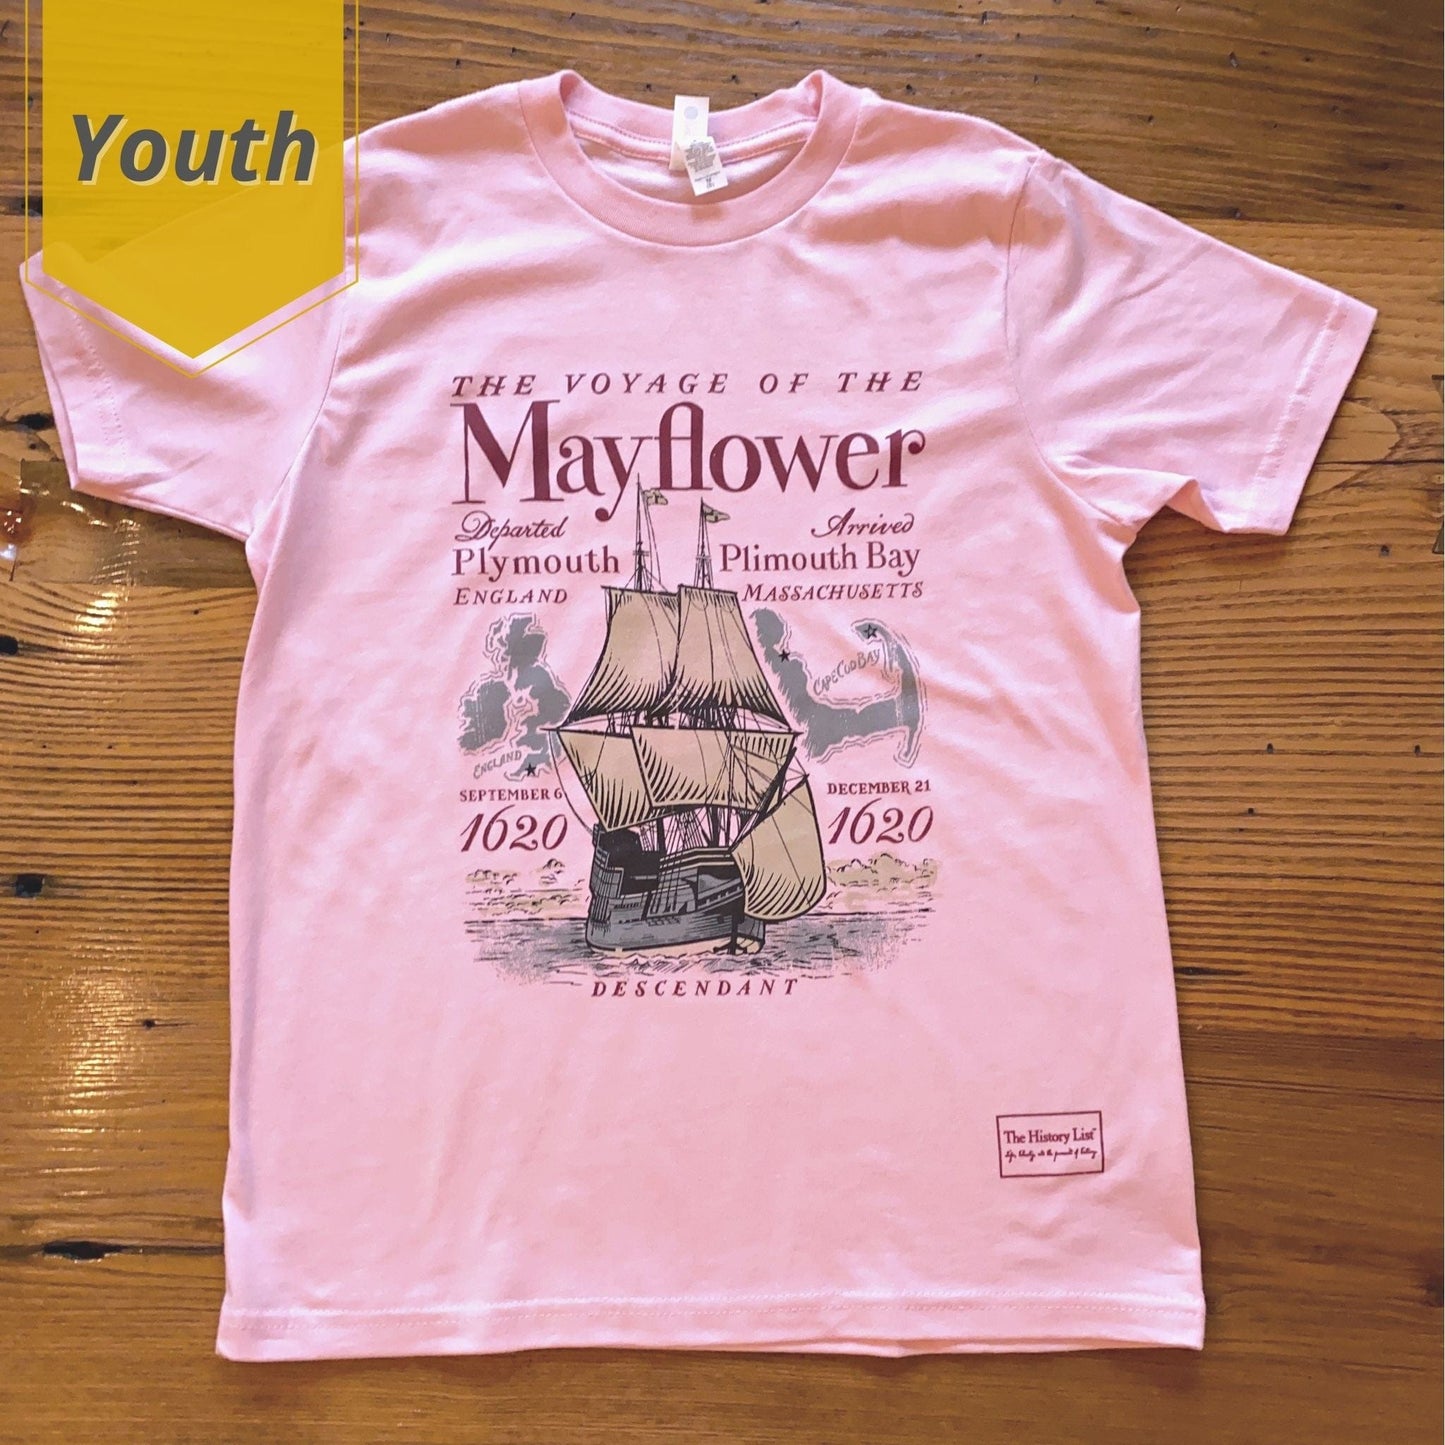 Light Pink "The Voyage of the Mayflower" Shirt in Youth sizes from the history list store